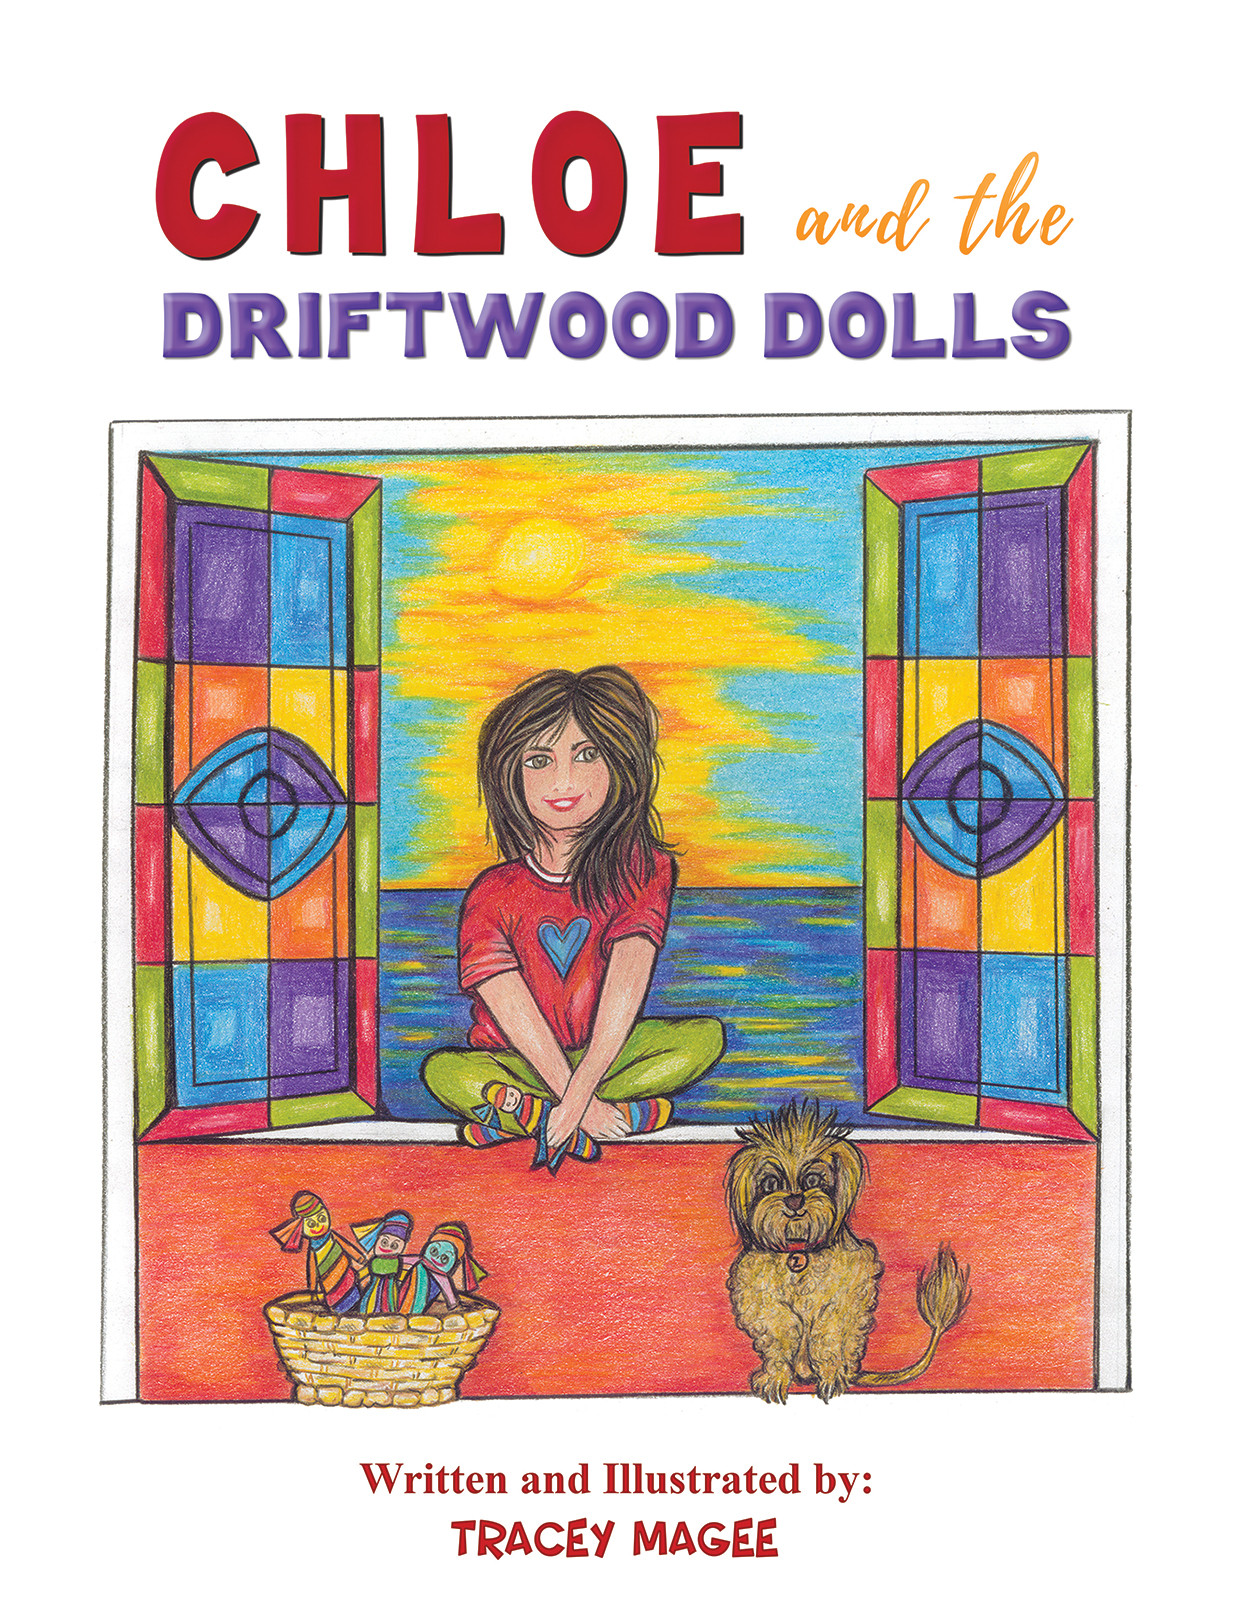 Chloe and the Driftwood Dolls